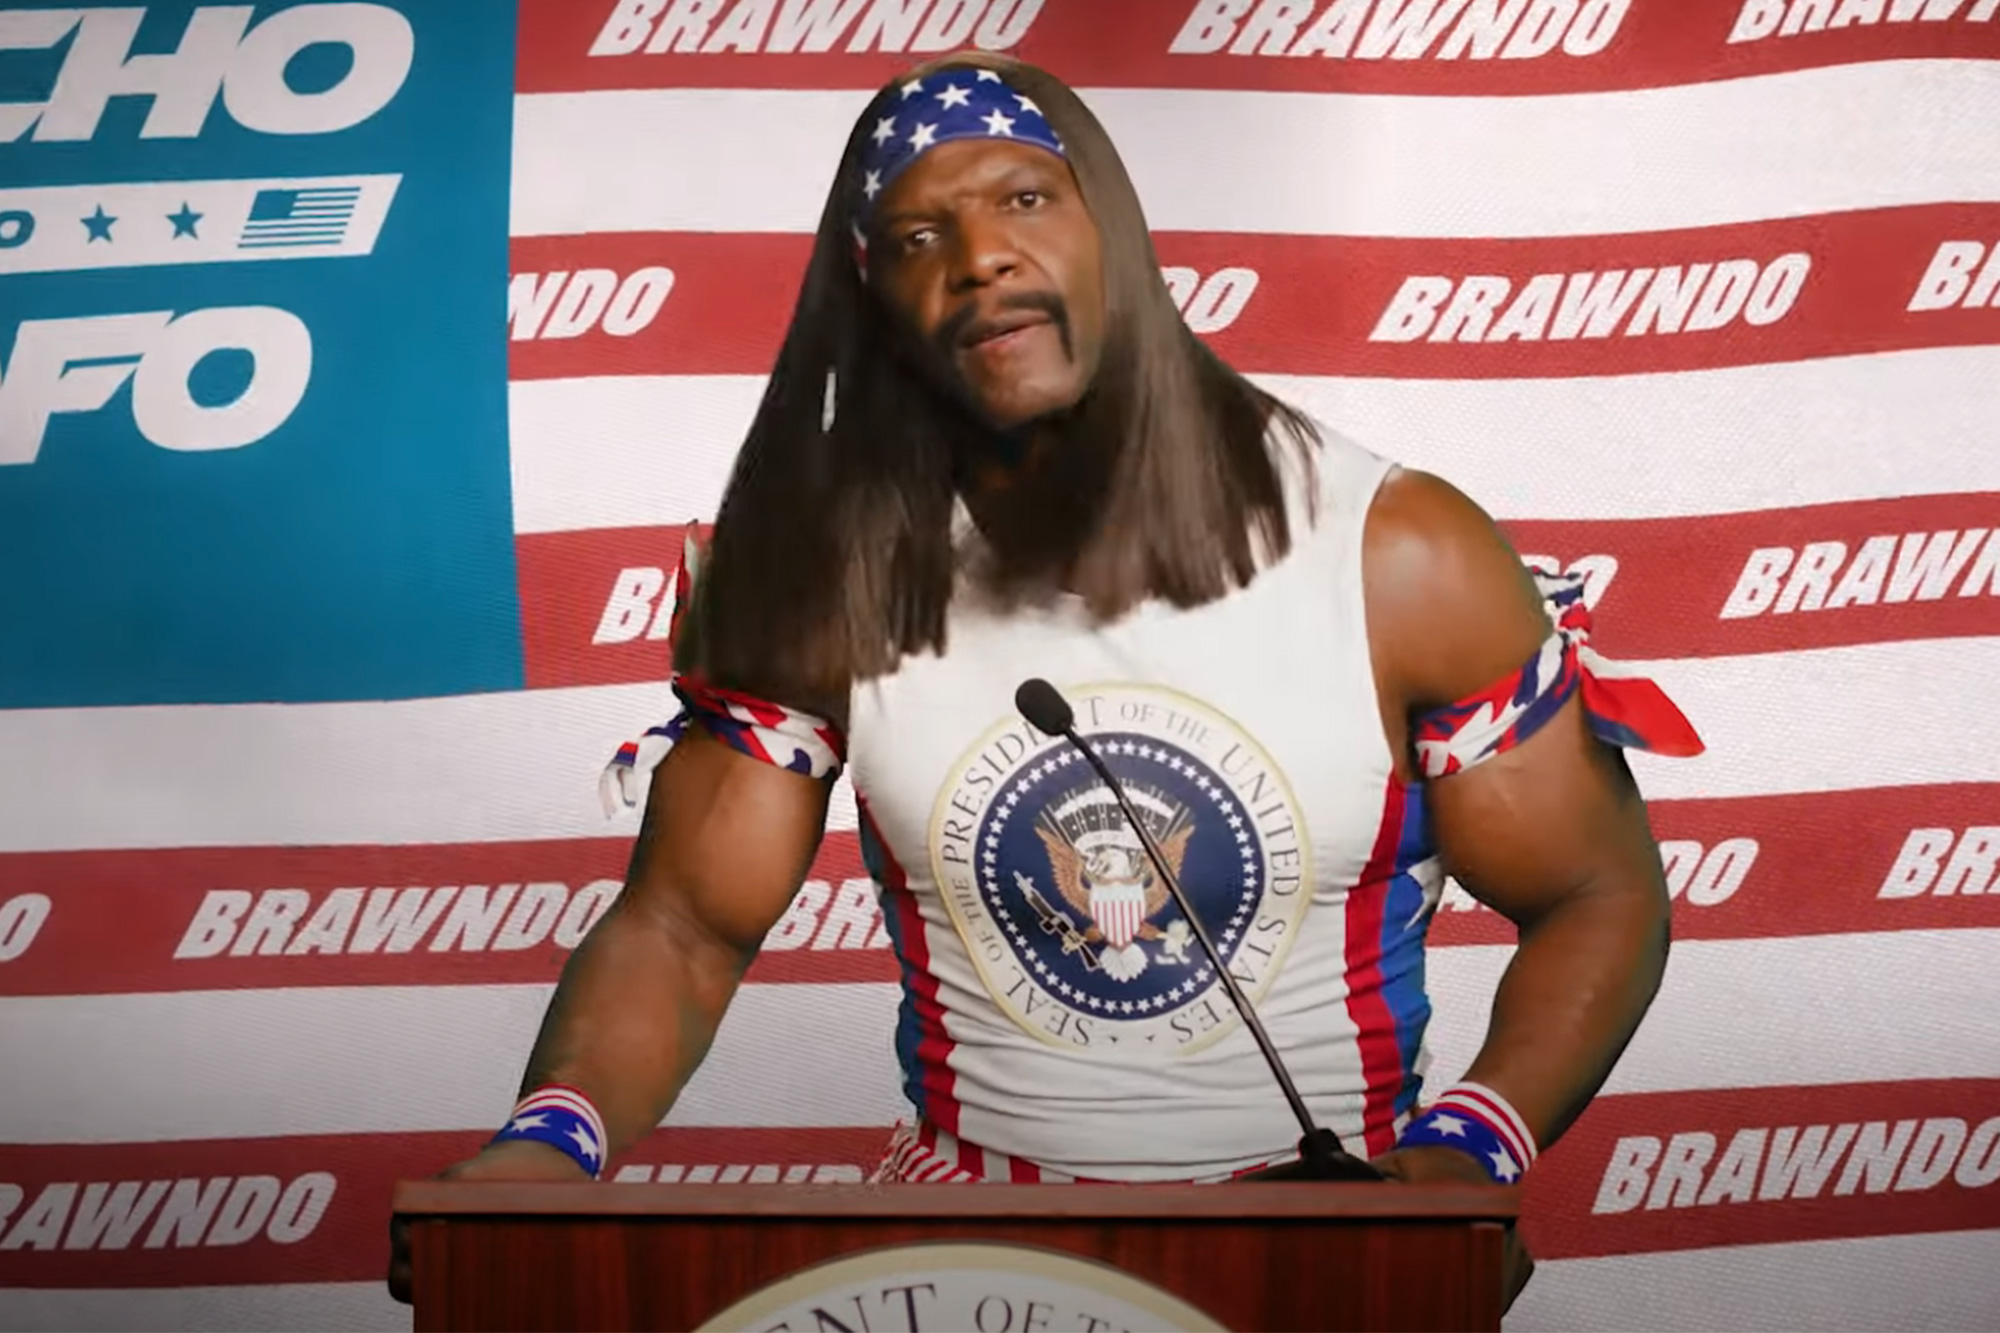 President Camacho Leads From Behind